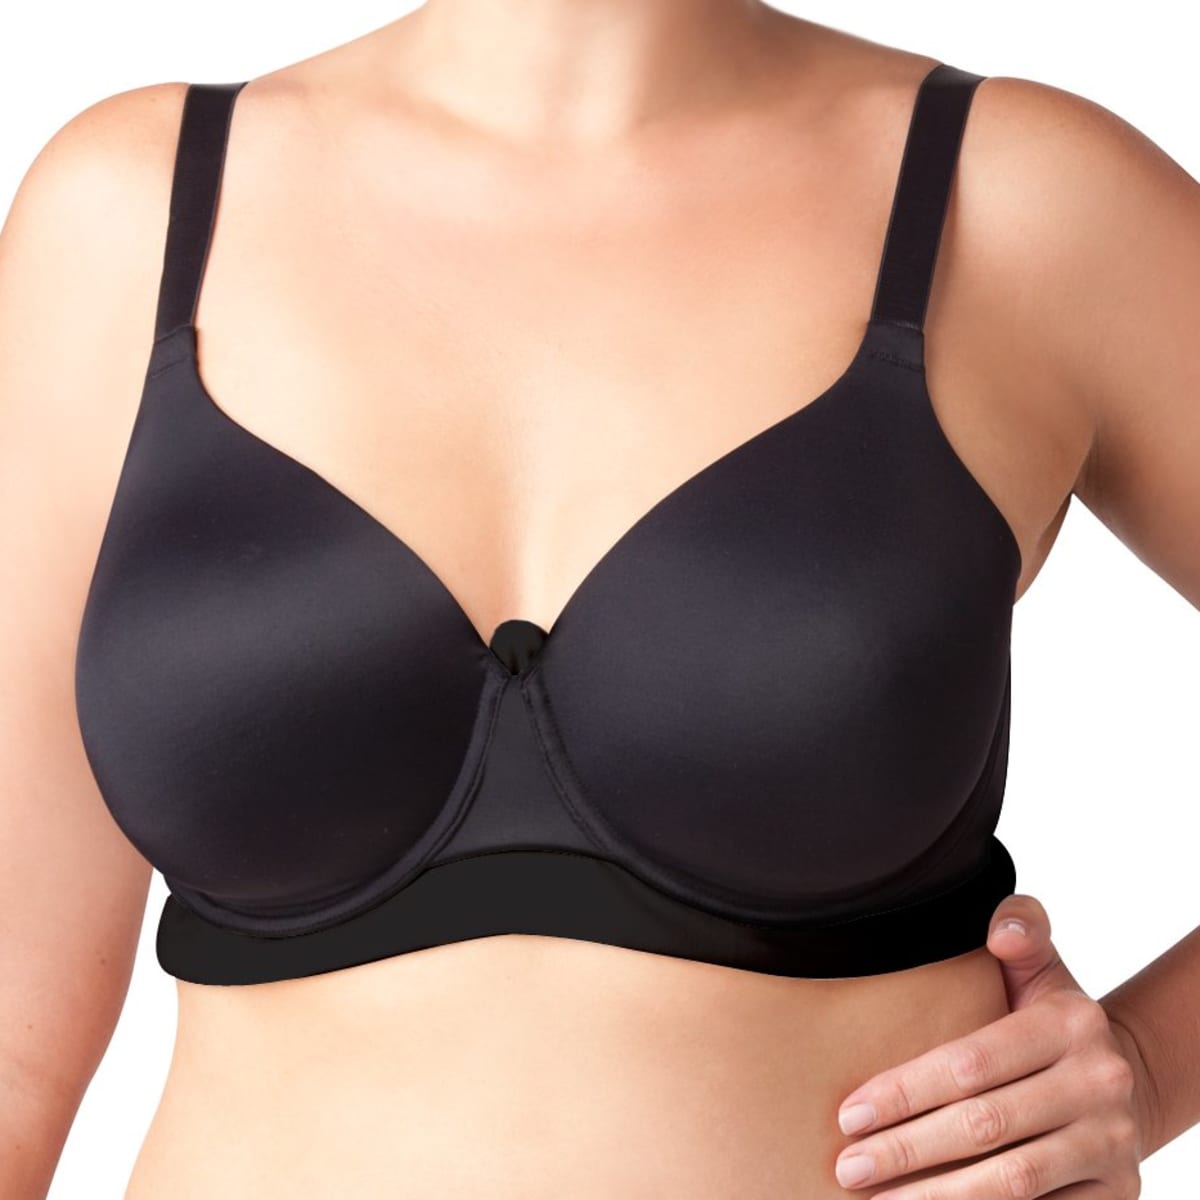 How did this bra do in “The Bounce Test”?